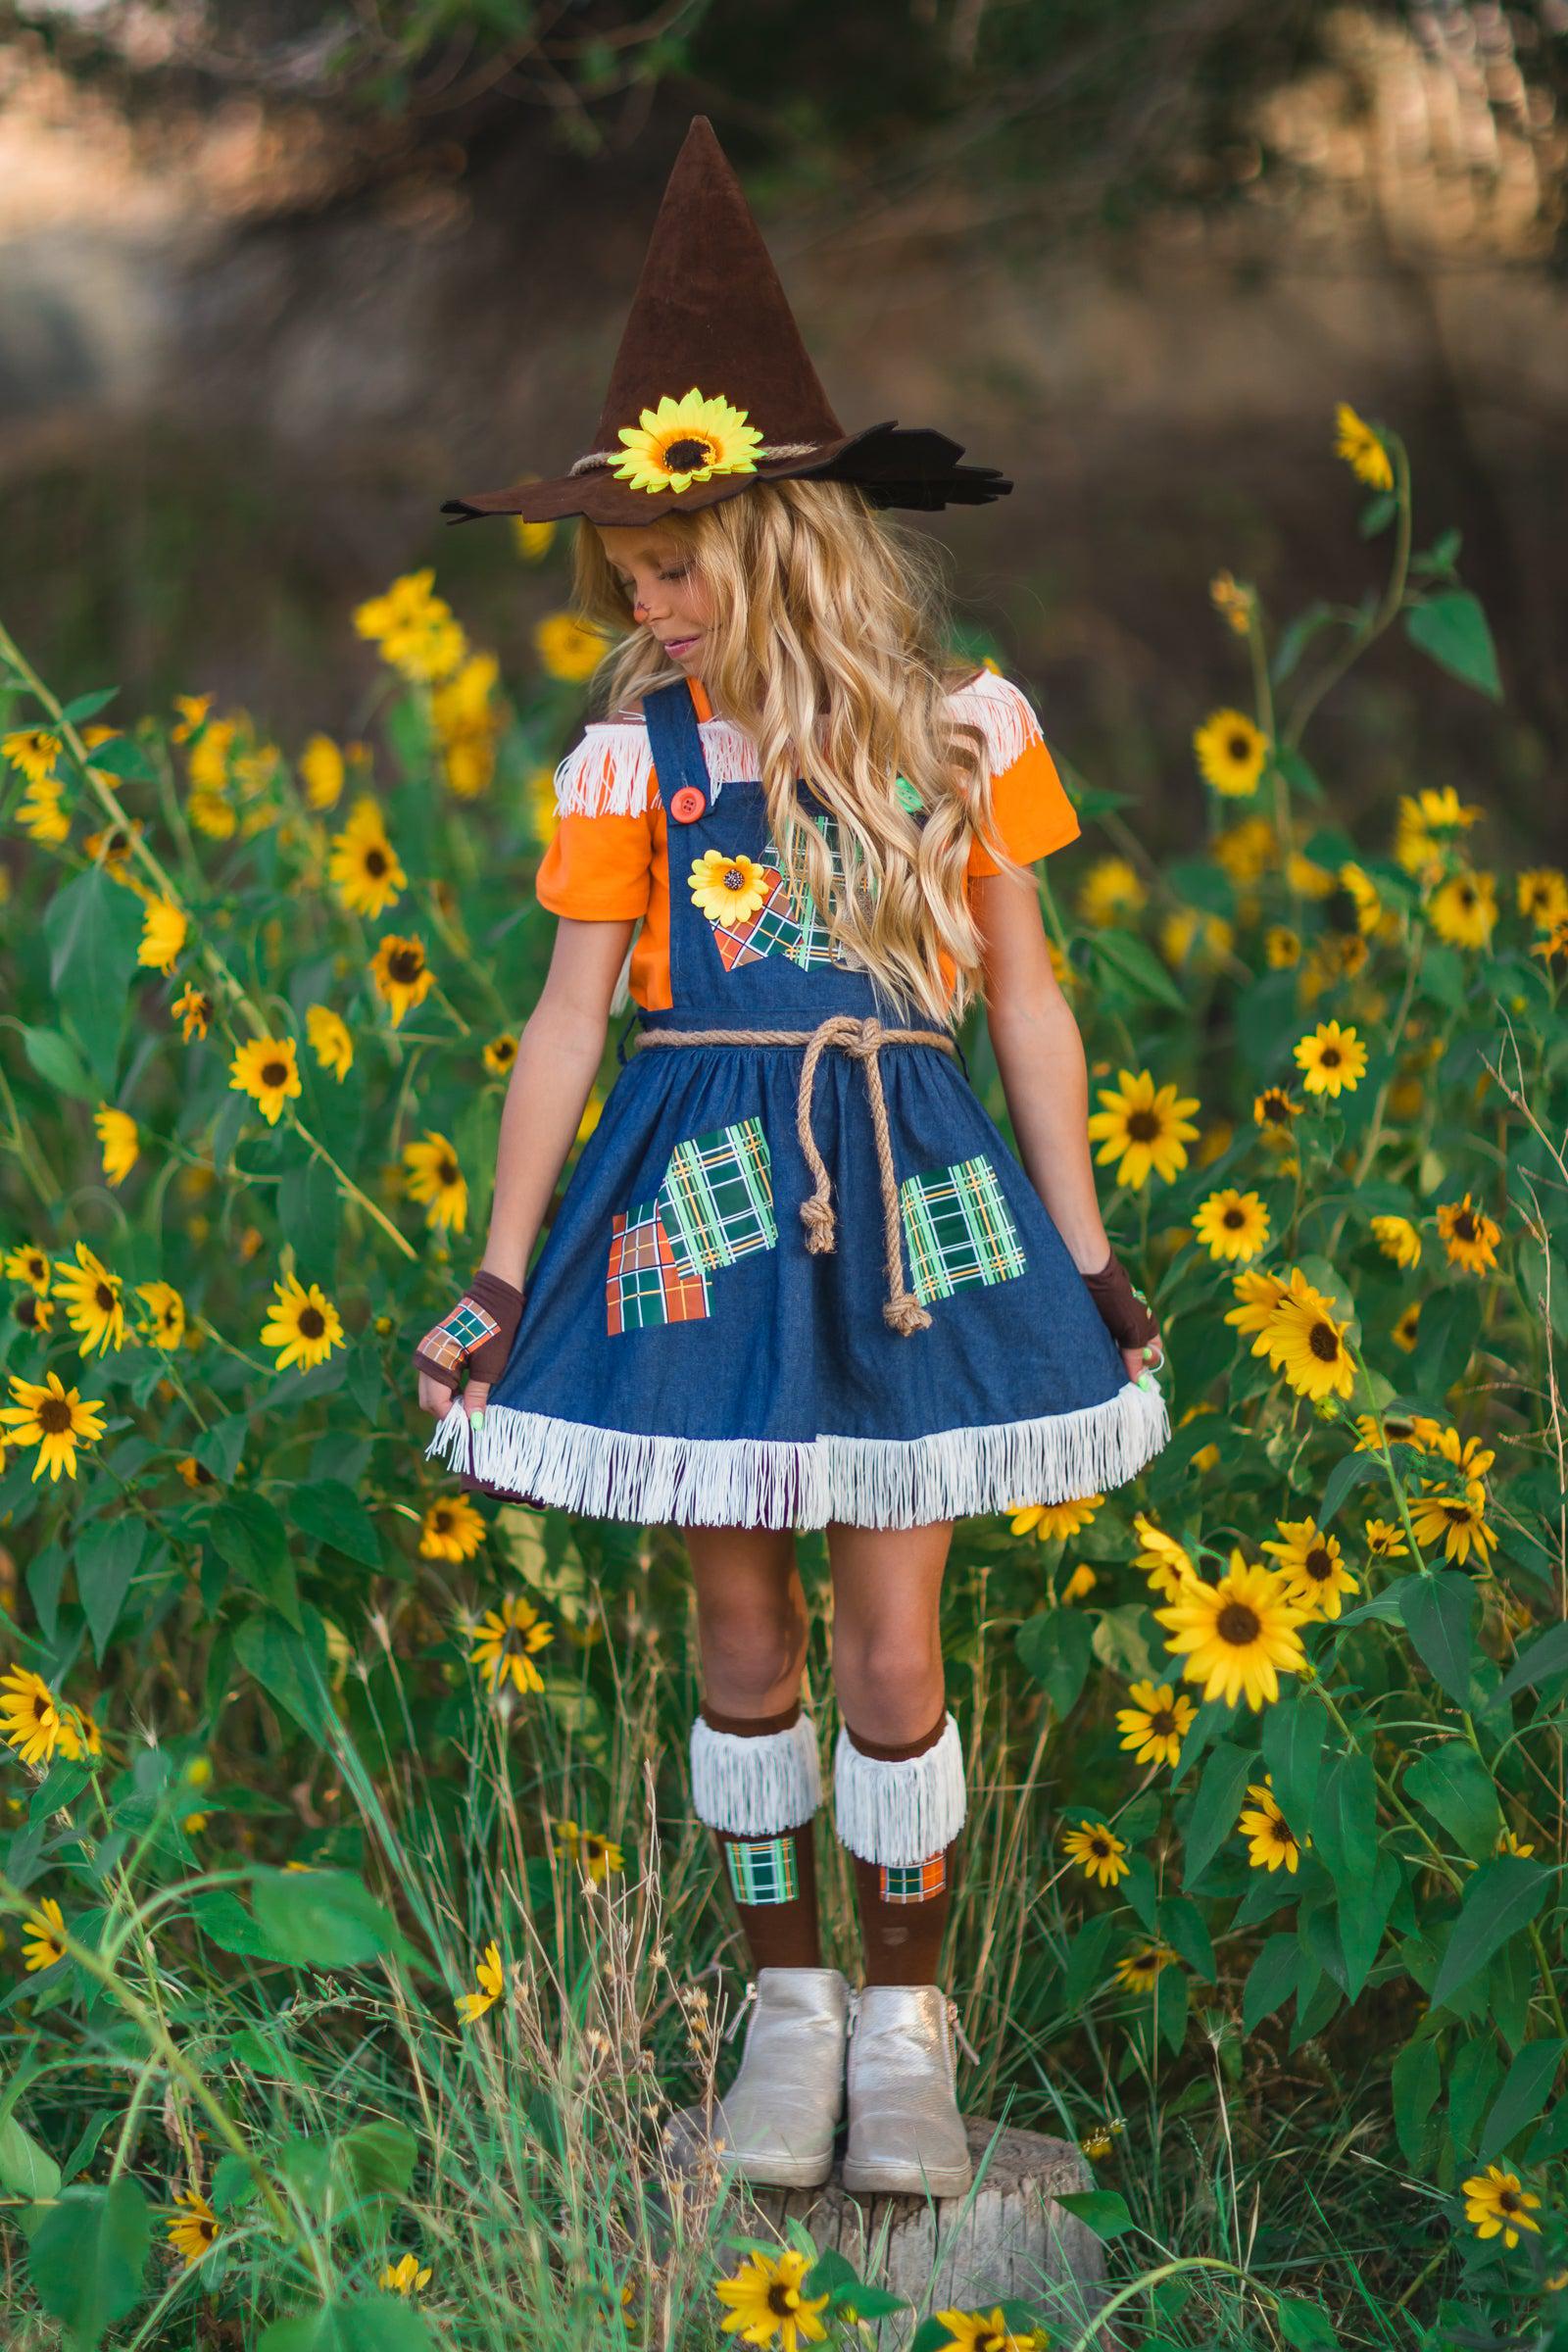 homemade scarecrow costume for women